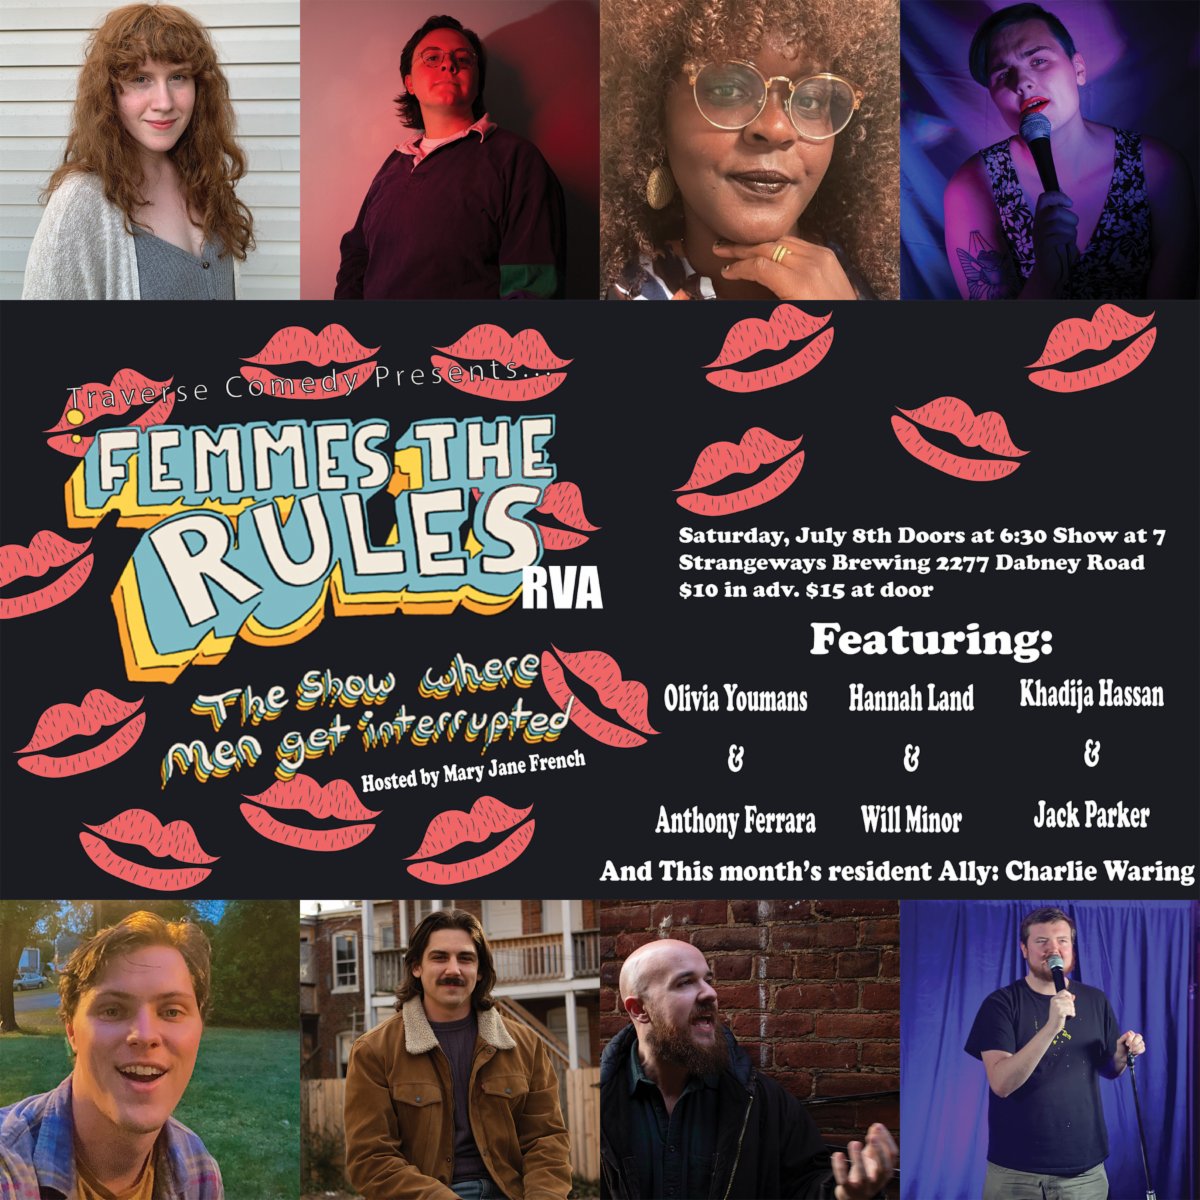 We are less than a week away from an all new Femmes The Rules at @strangewaysRVA! grab those tickets now to save on admission! see you there! You don't wanna miss this one, folks! linktr.ee/traversecomedy #ComedyRVA #RVA #RichmondVA #ThingsToDoInRVA #ThingsToDoInRichmondVA